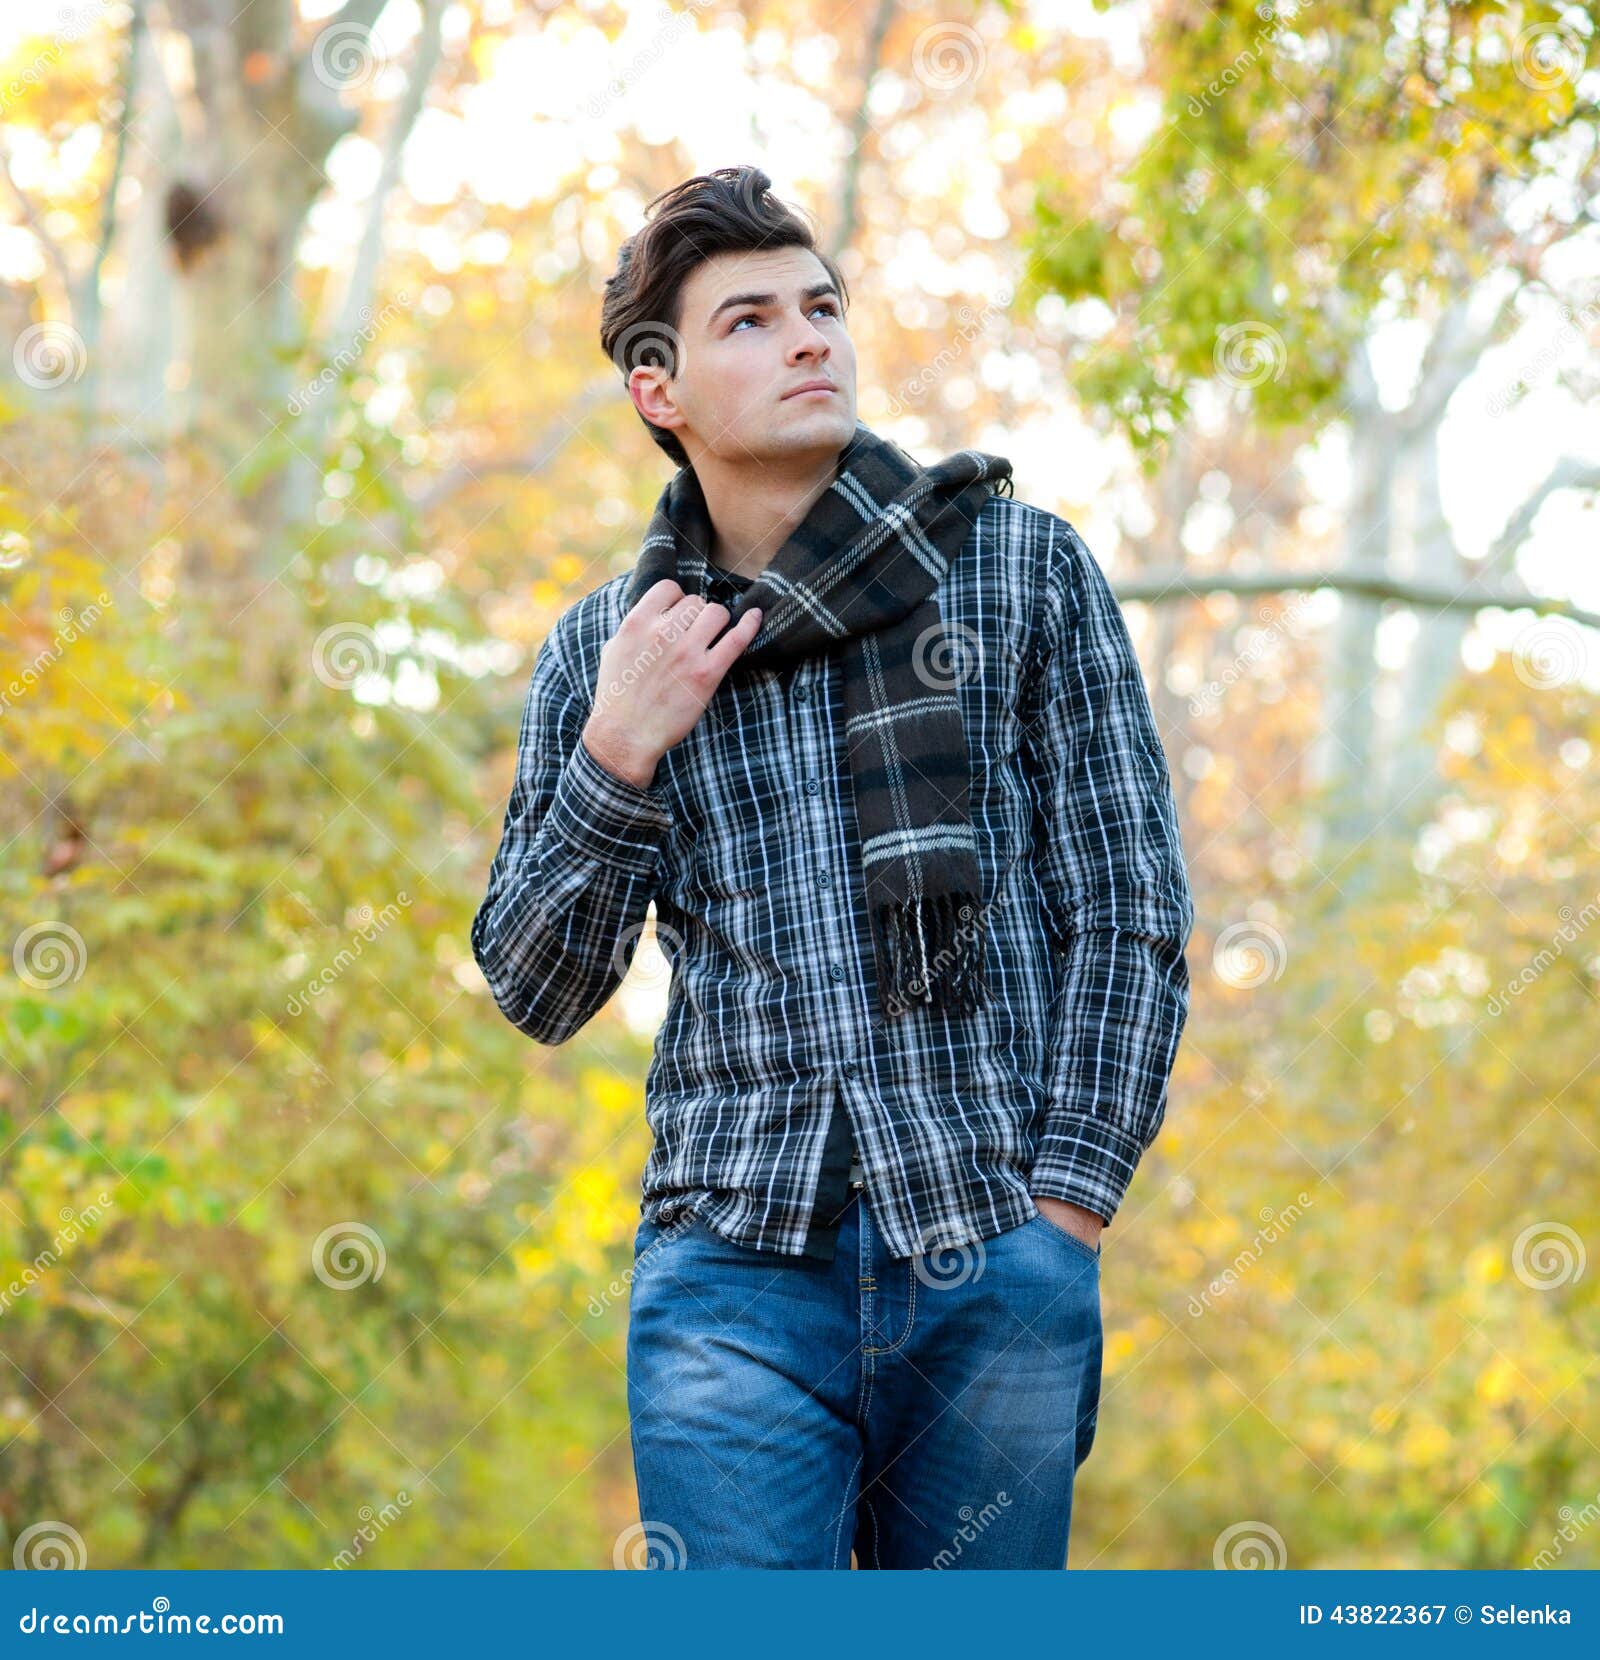 Man Dressed in a Plaid Scarf Walking in Autumn Park. Stock Image ...